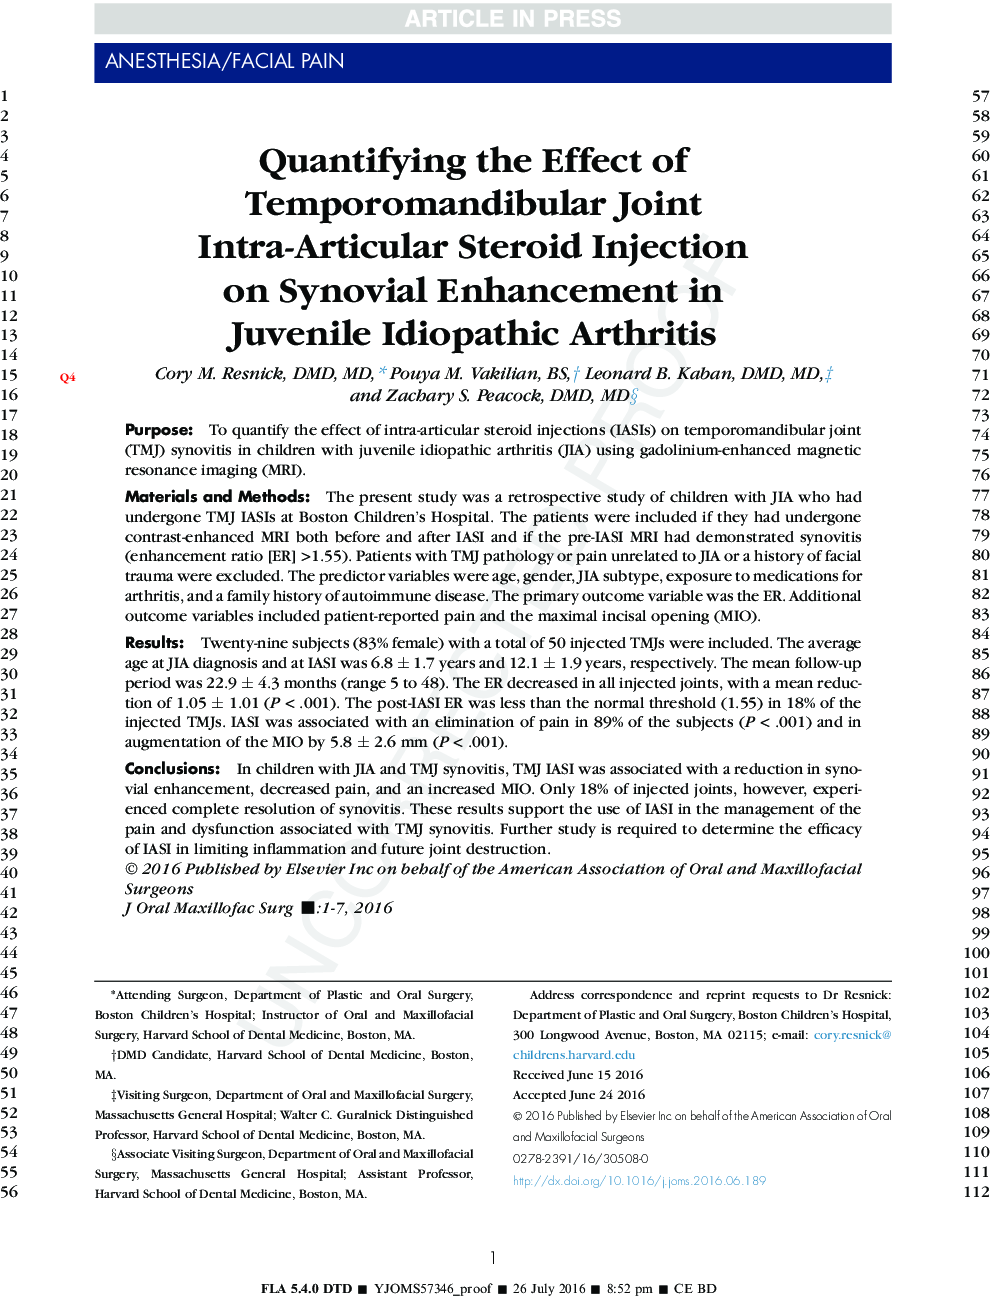 Quantifying the Effect of Temporomandibular Joint Intra-Articular Steroid Injection on Synovial Enhancement in Juvenile Idiopathic Arthritis